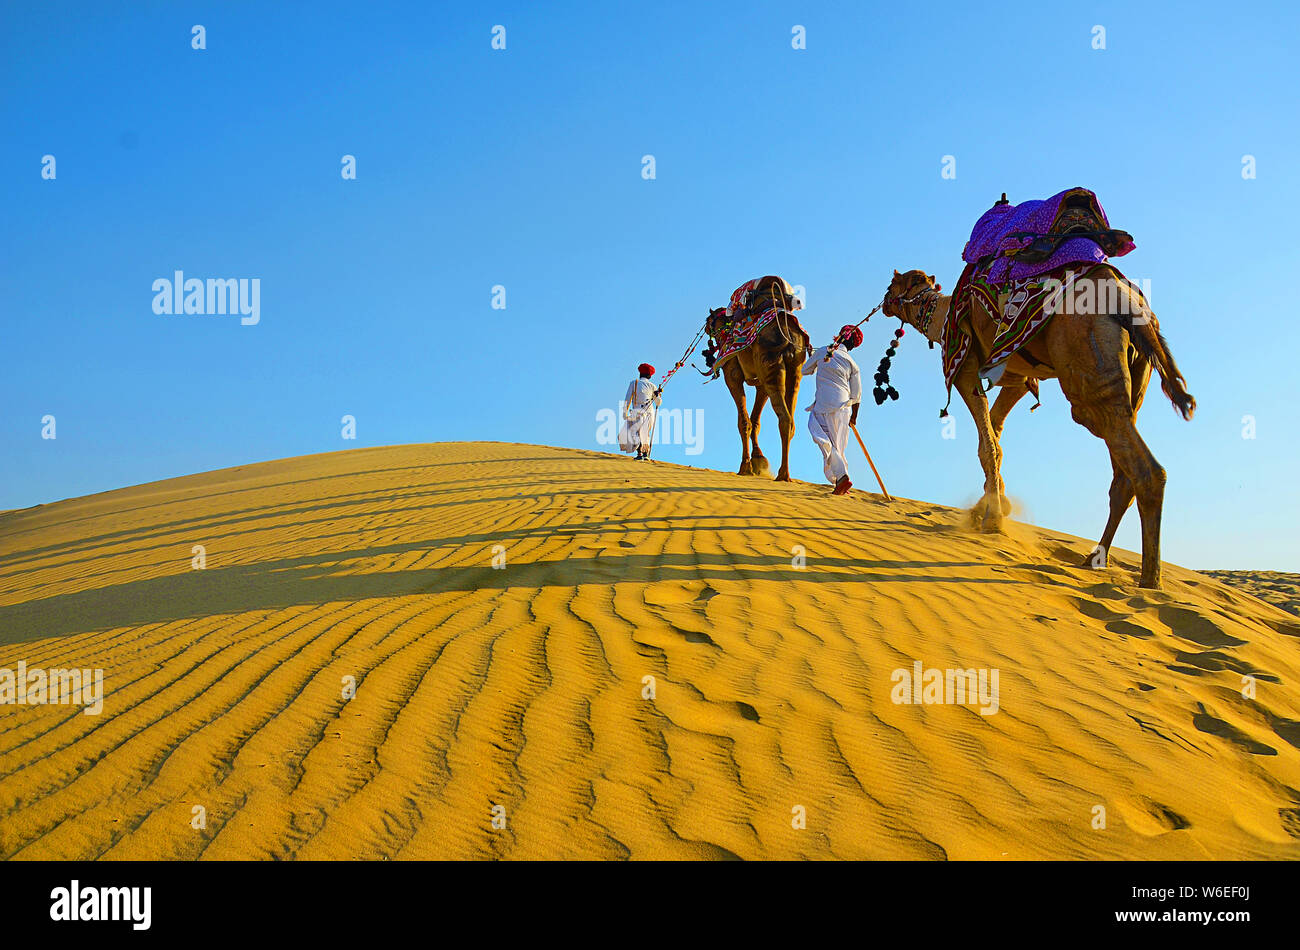 Travel background - Two cameleers with camels walking on golden sand dunes  of thar desert against blue sky , Jaisalmer, Rajasthan, India Stock Photo -  Alamy